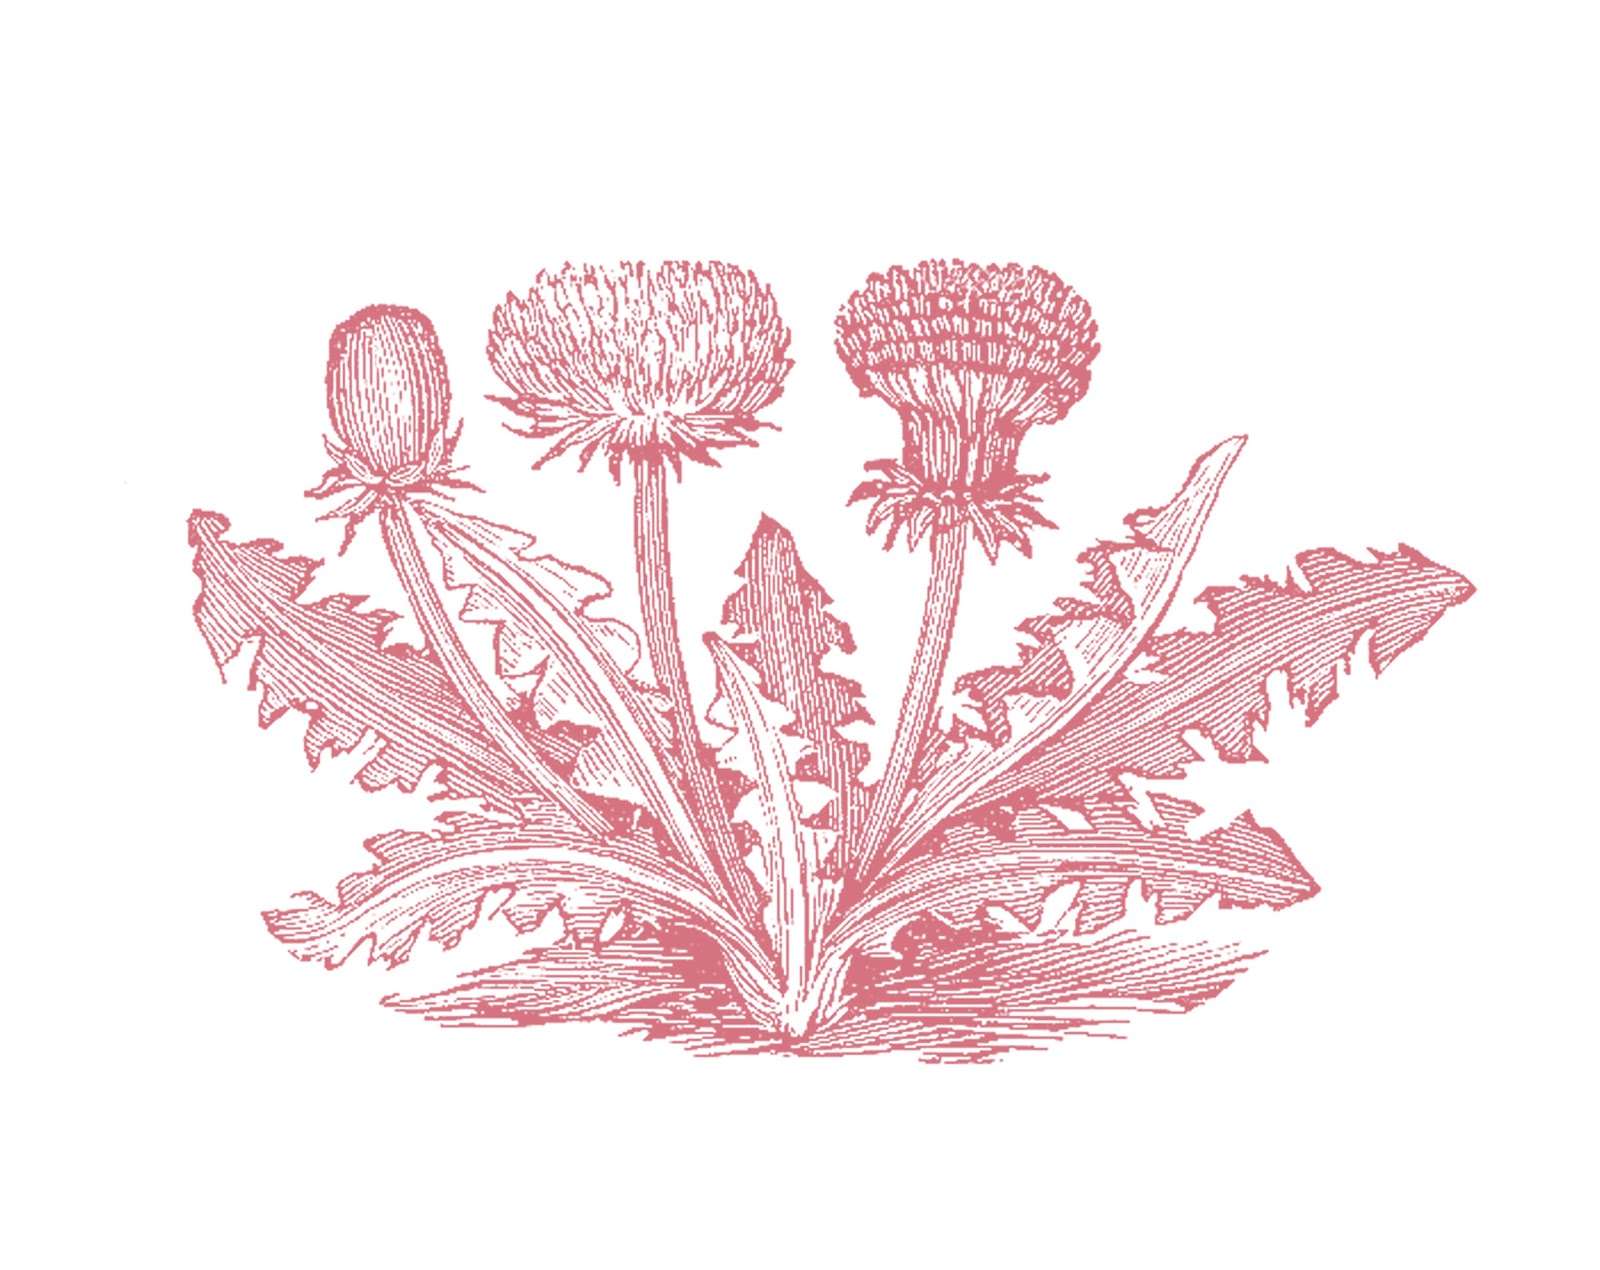 Antique Images: Free Vintage Botanical Graphic: Black and White